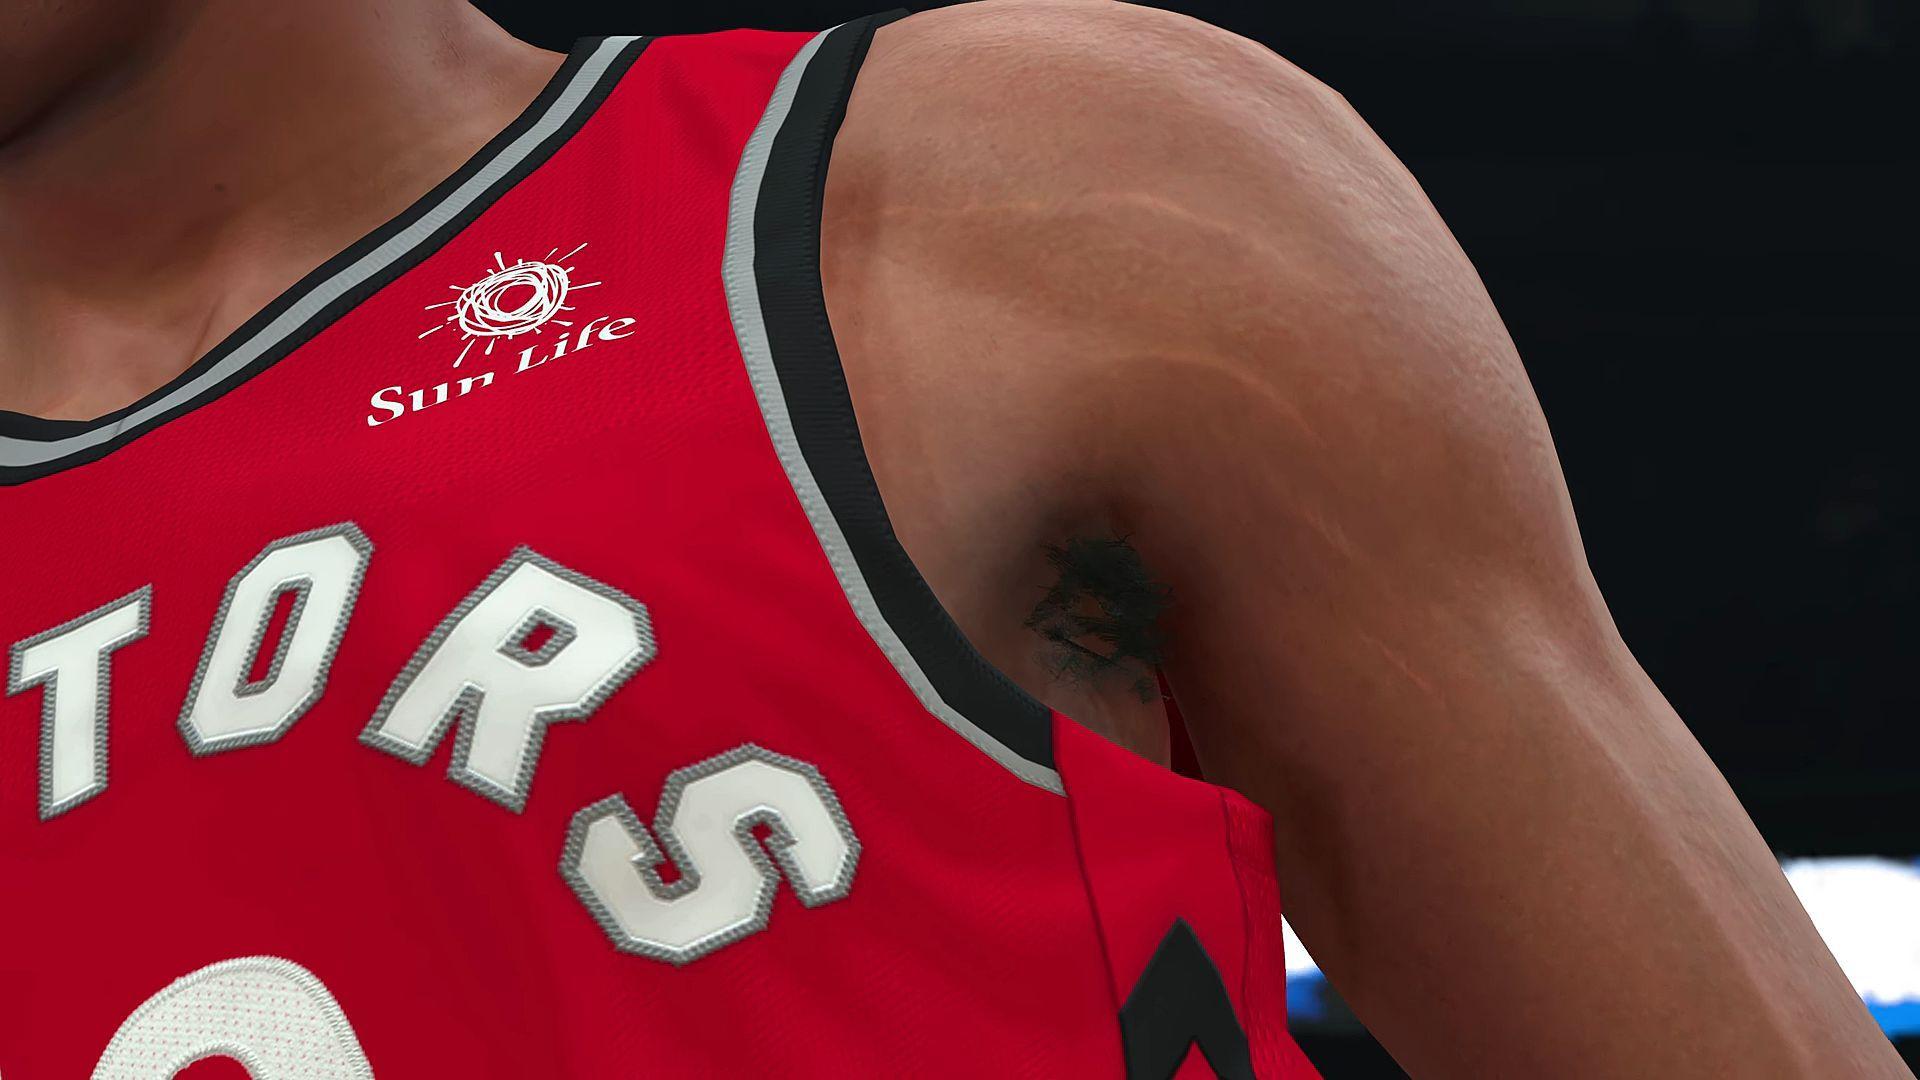 The Art Behind NBA 2K18 weirdly chooses to showcase, uh, stretch marks